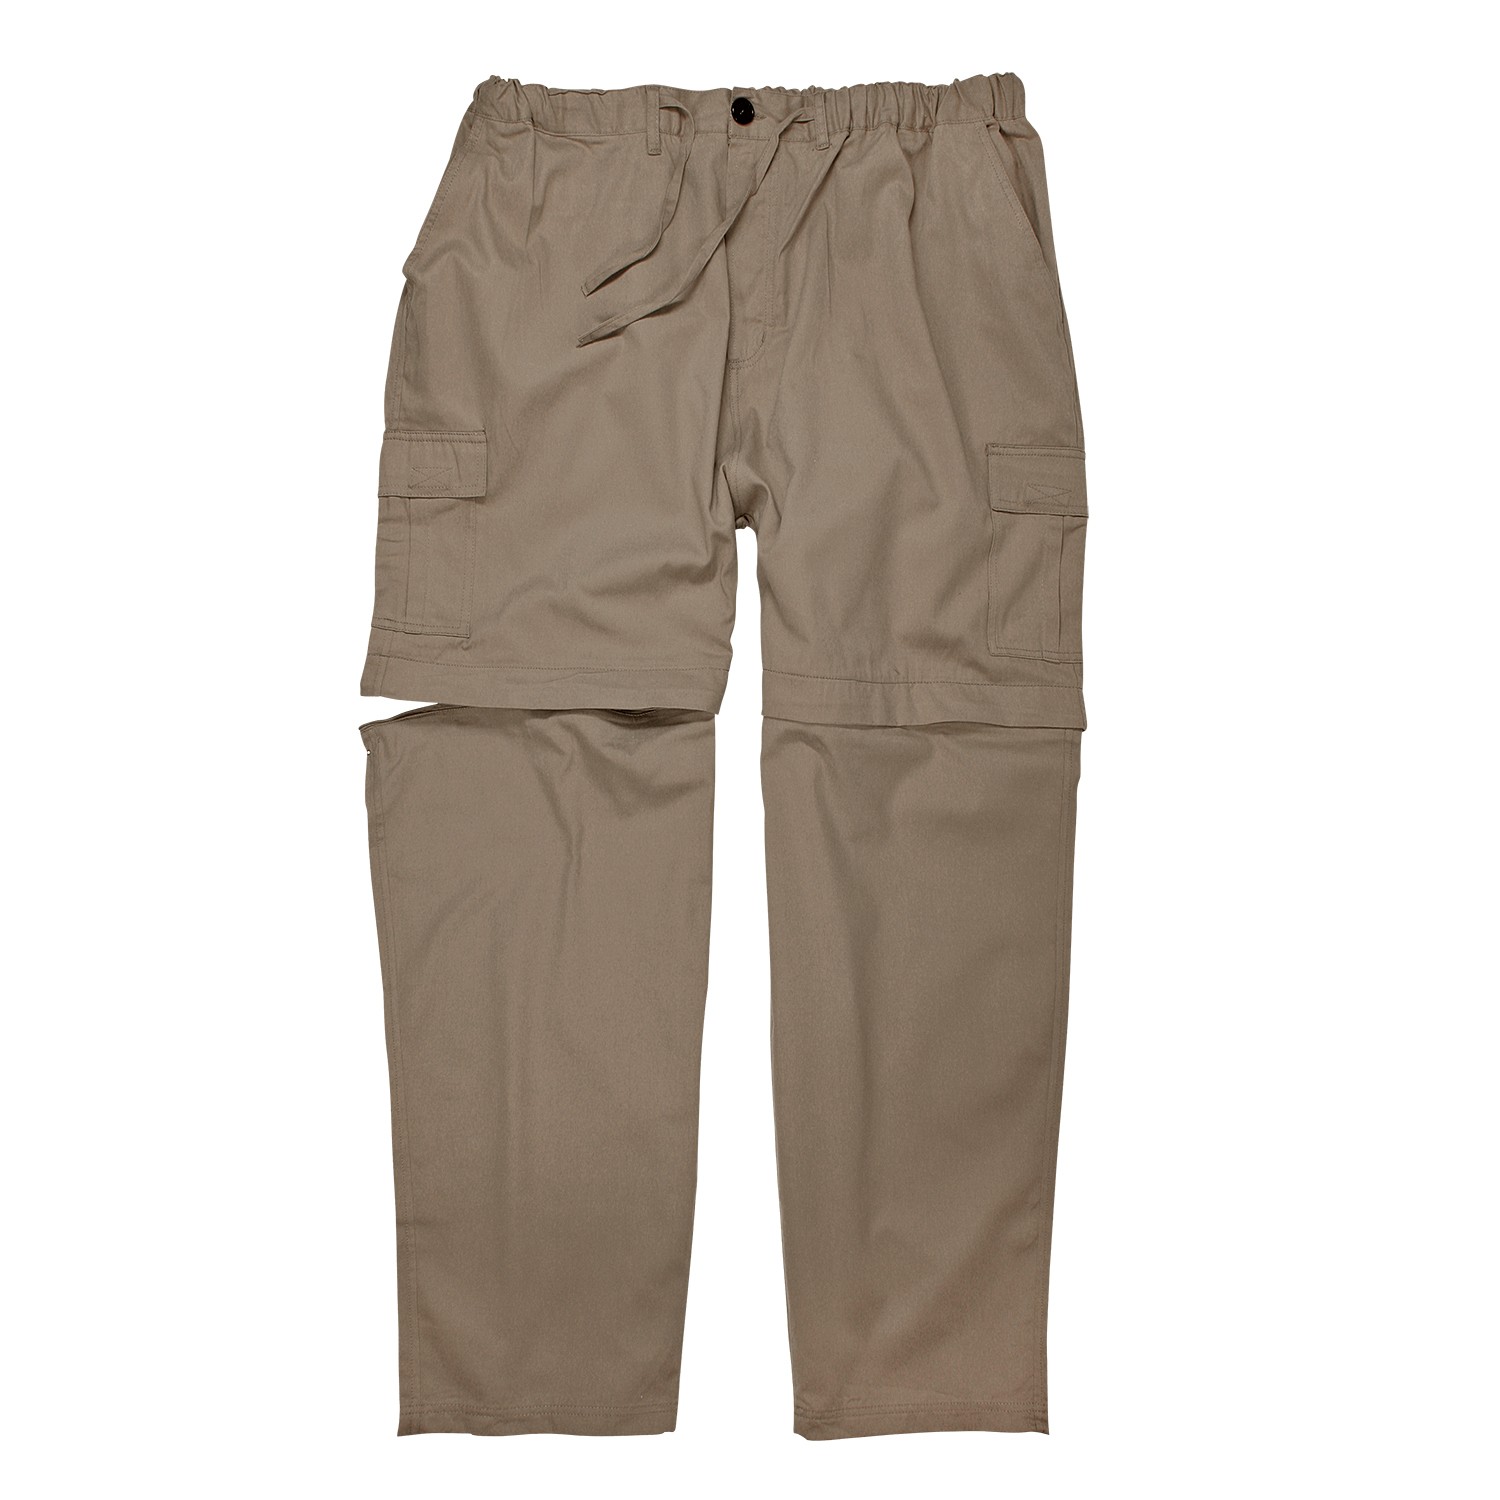 Khaki zip-off-trousers from Abraxas in oversizes until 10XL